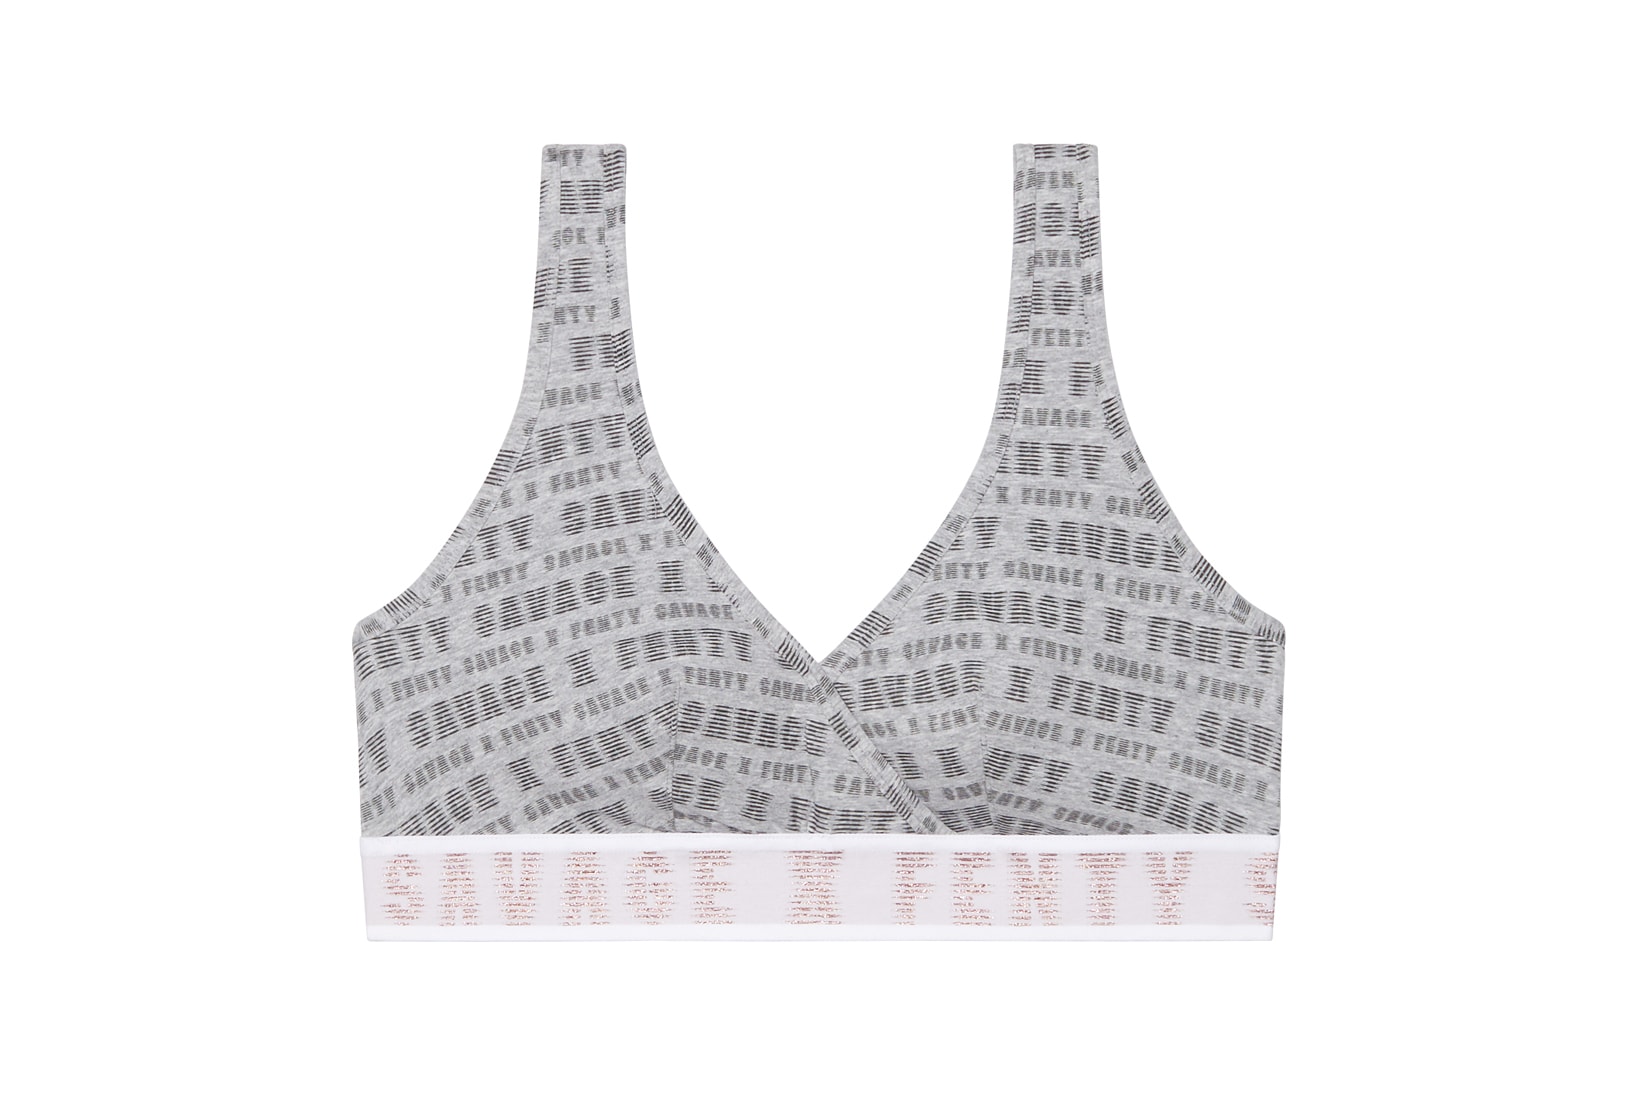 FOREVER SAVAGE BRALETTE WITH RAINBOW LOGO